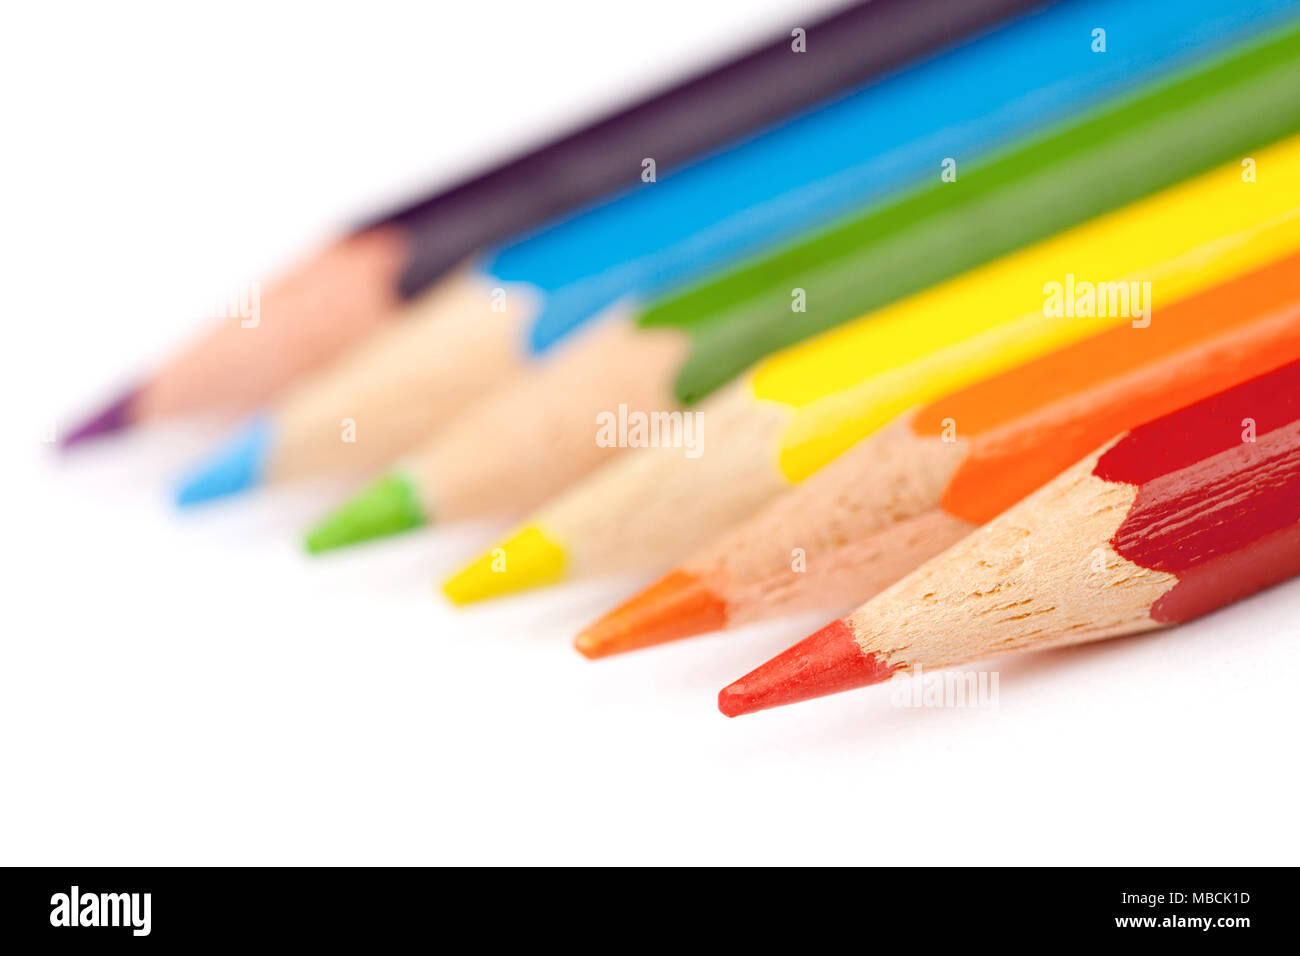 Colour pencils isolated on white background Stock Photo